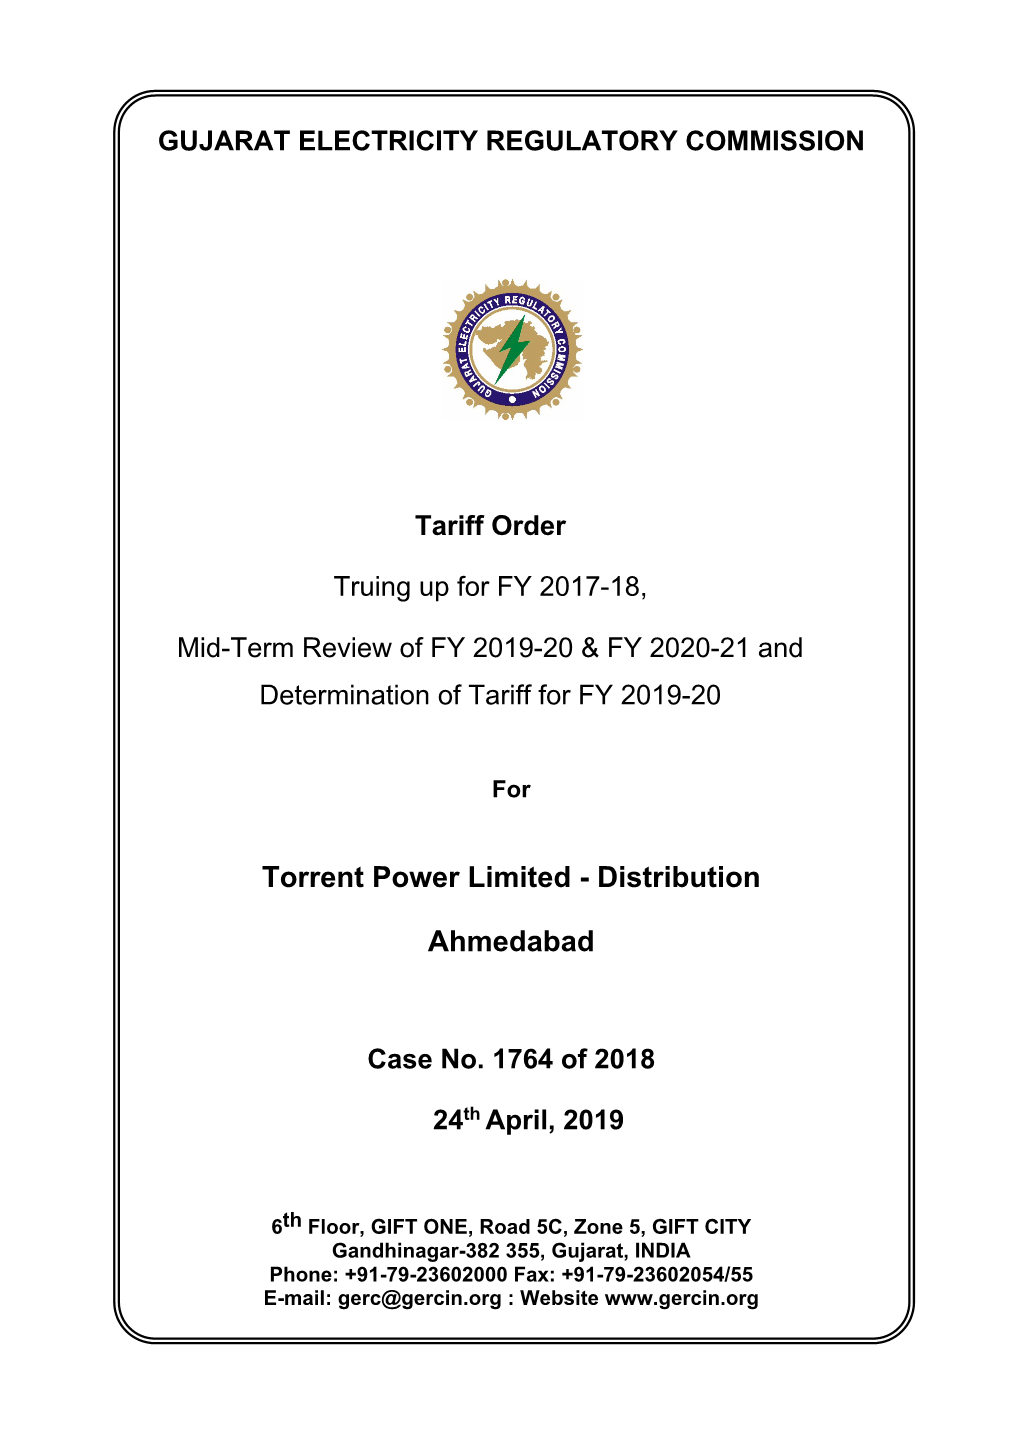 1764-2018 True up FY 2017-18 MTR Order 24.04.2019(With Logo)